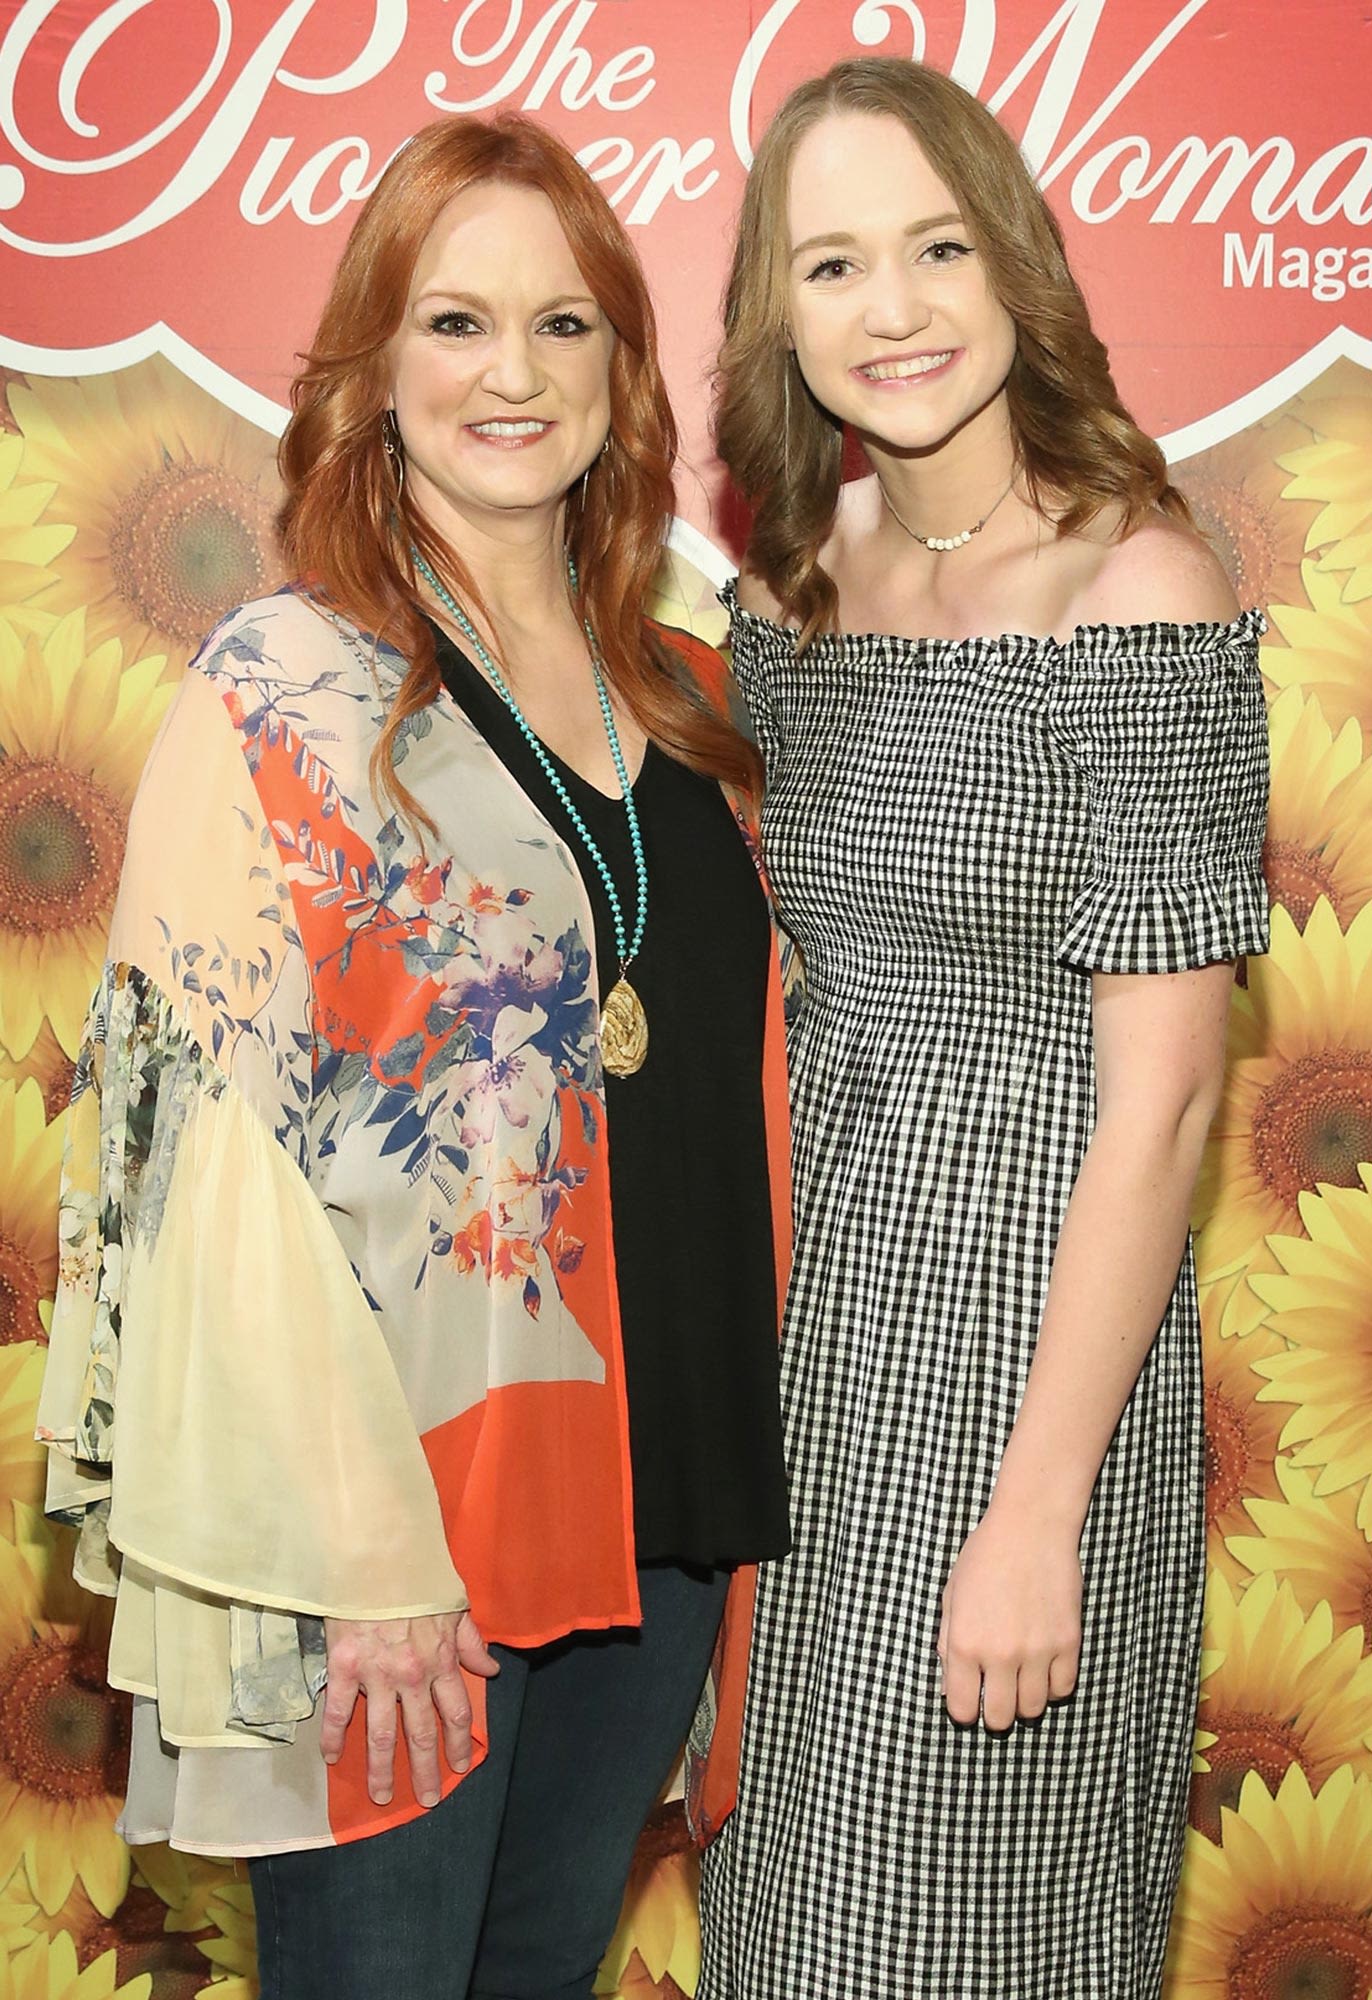 Pioneer Woman Ree Drummond Celebrates Daughter Paige’s Engagement: ‘We Are So Happy’